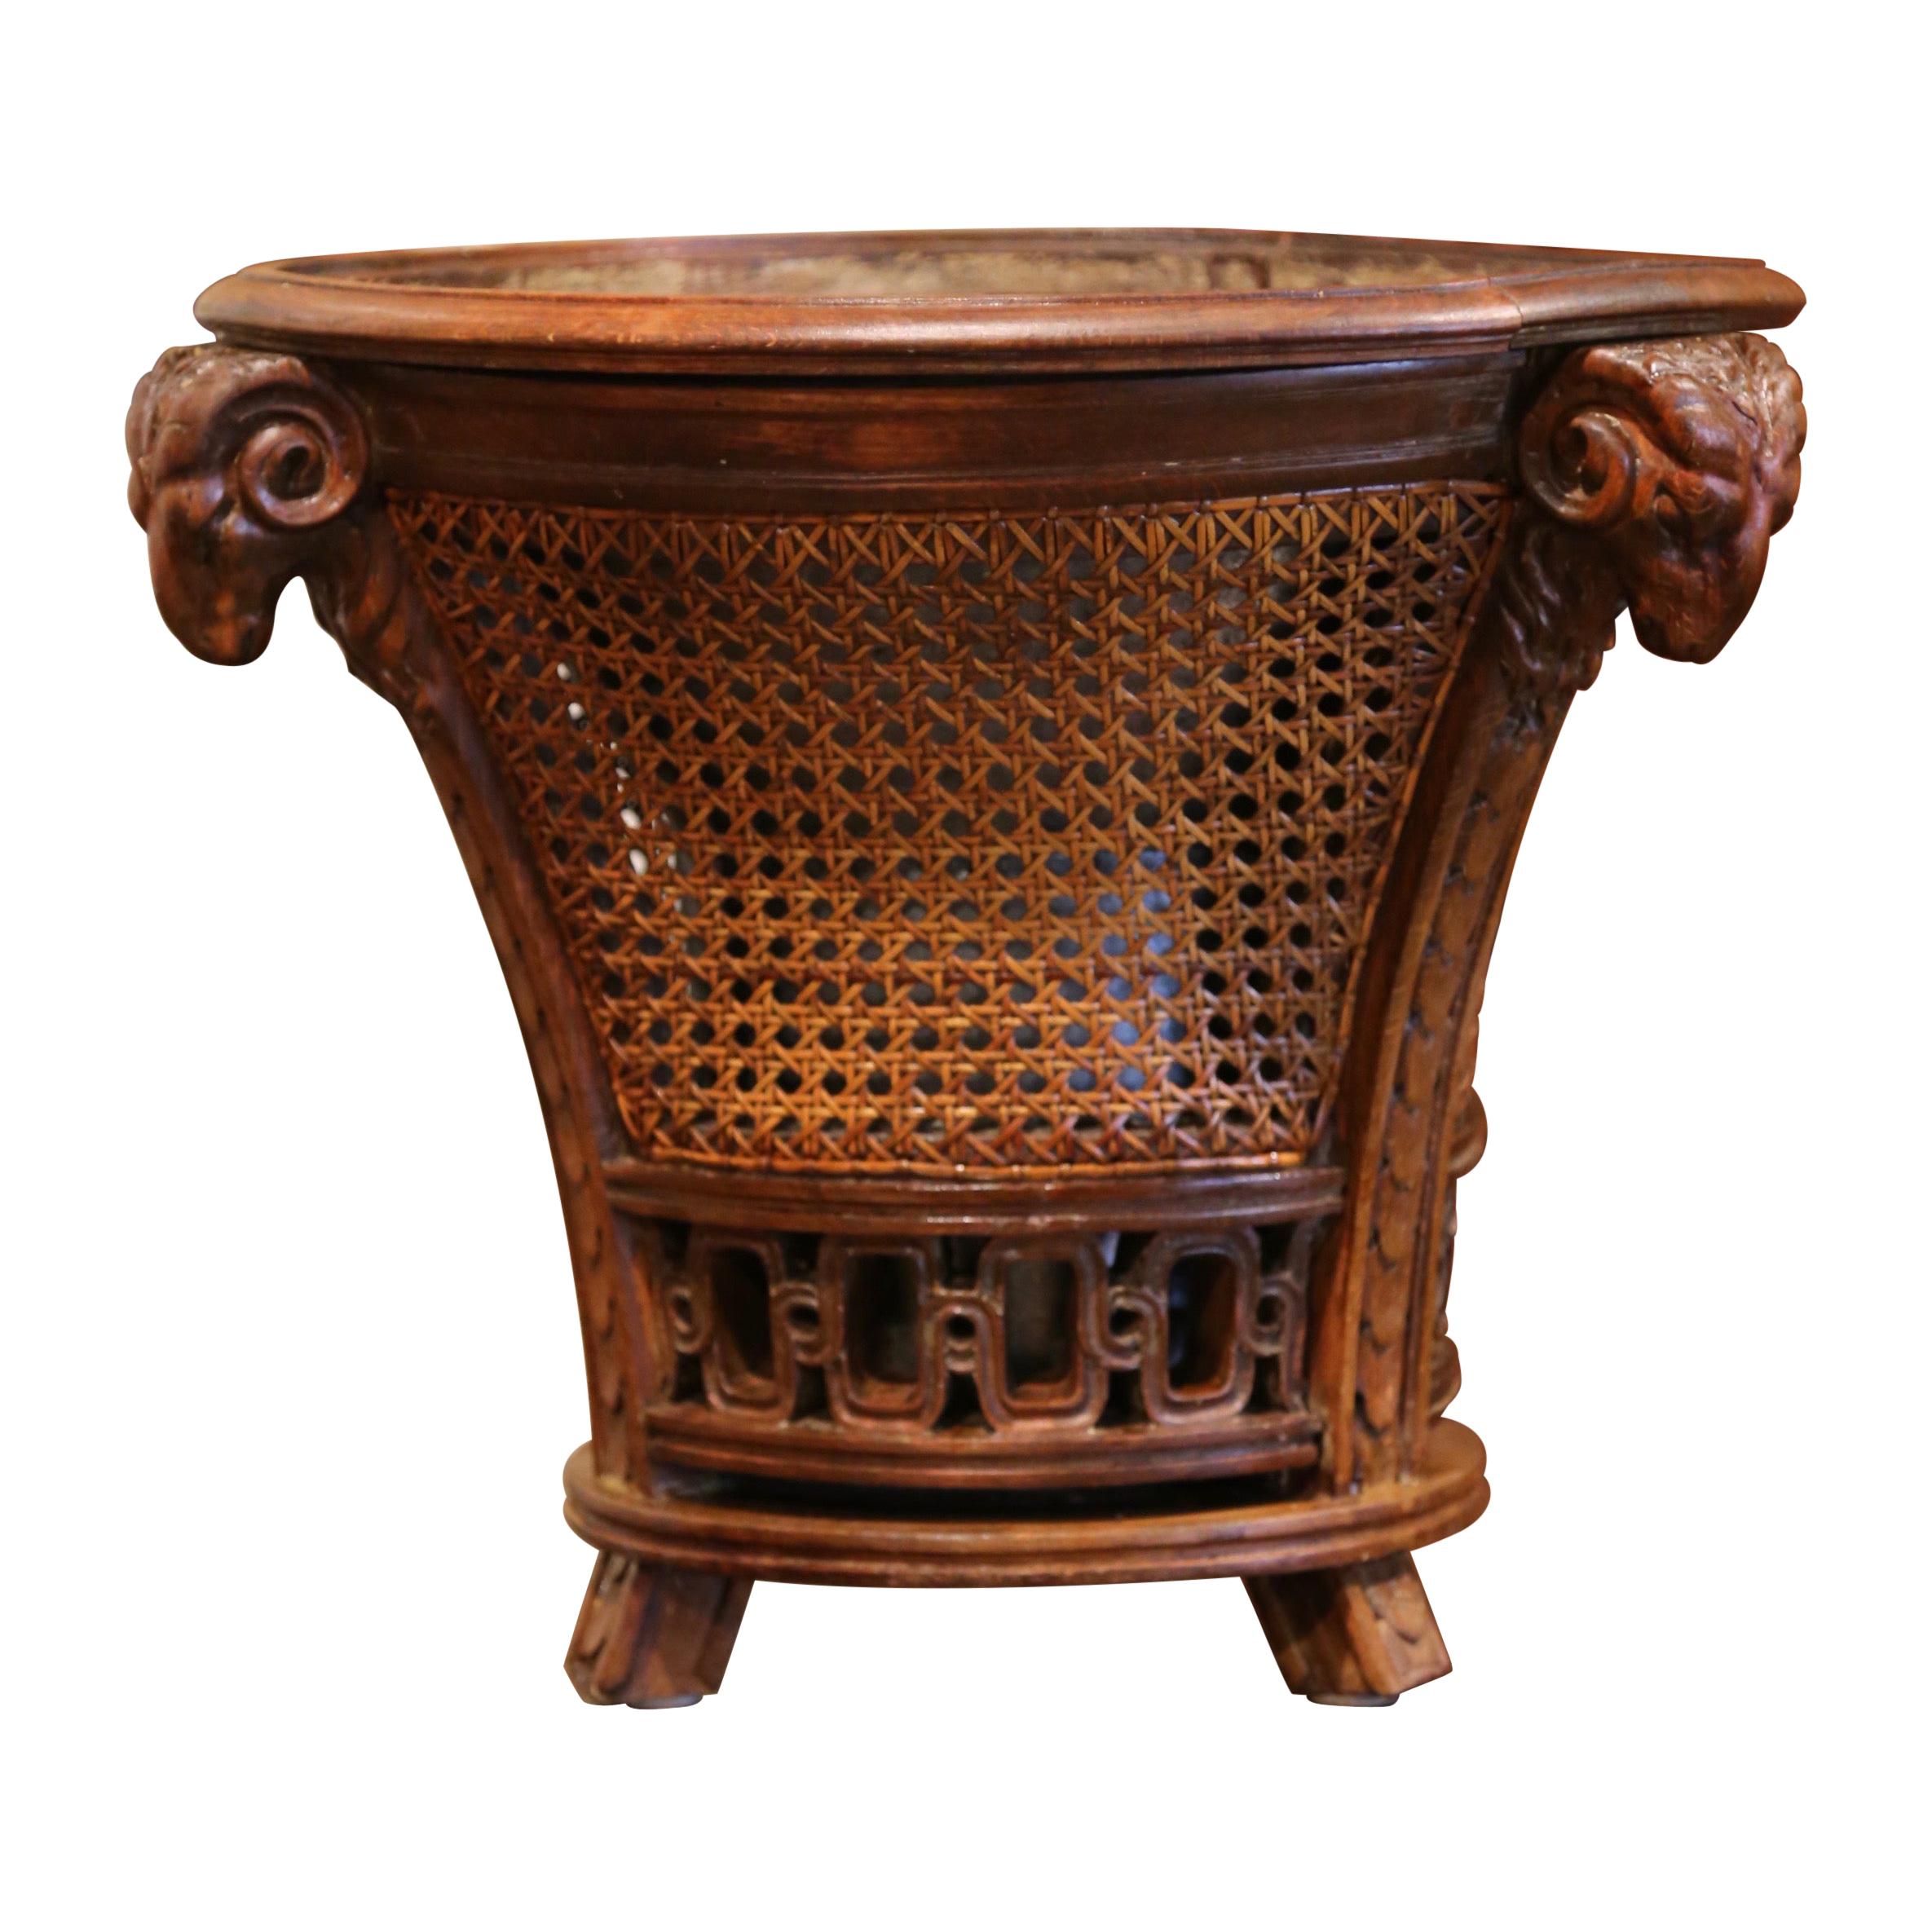 19th Century French Carved Walnut and Cane Jardiniere with Inside Zinc Liner